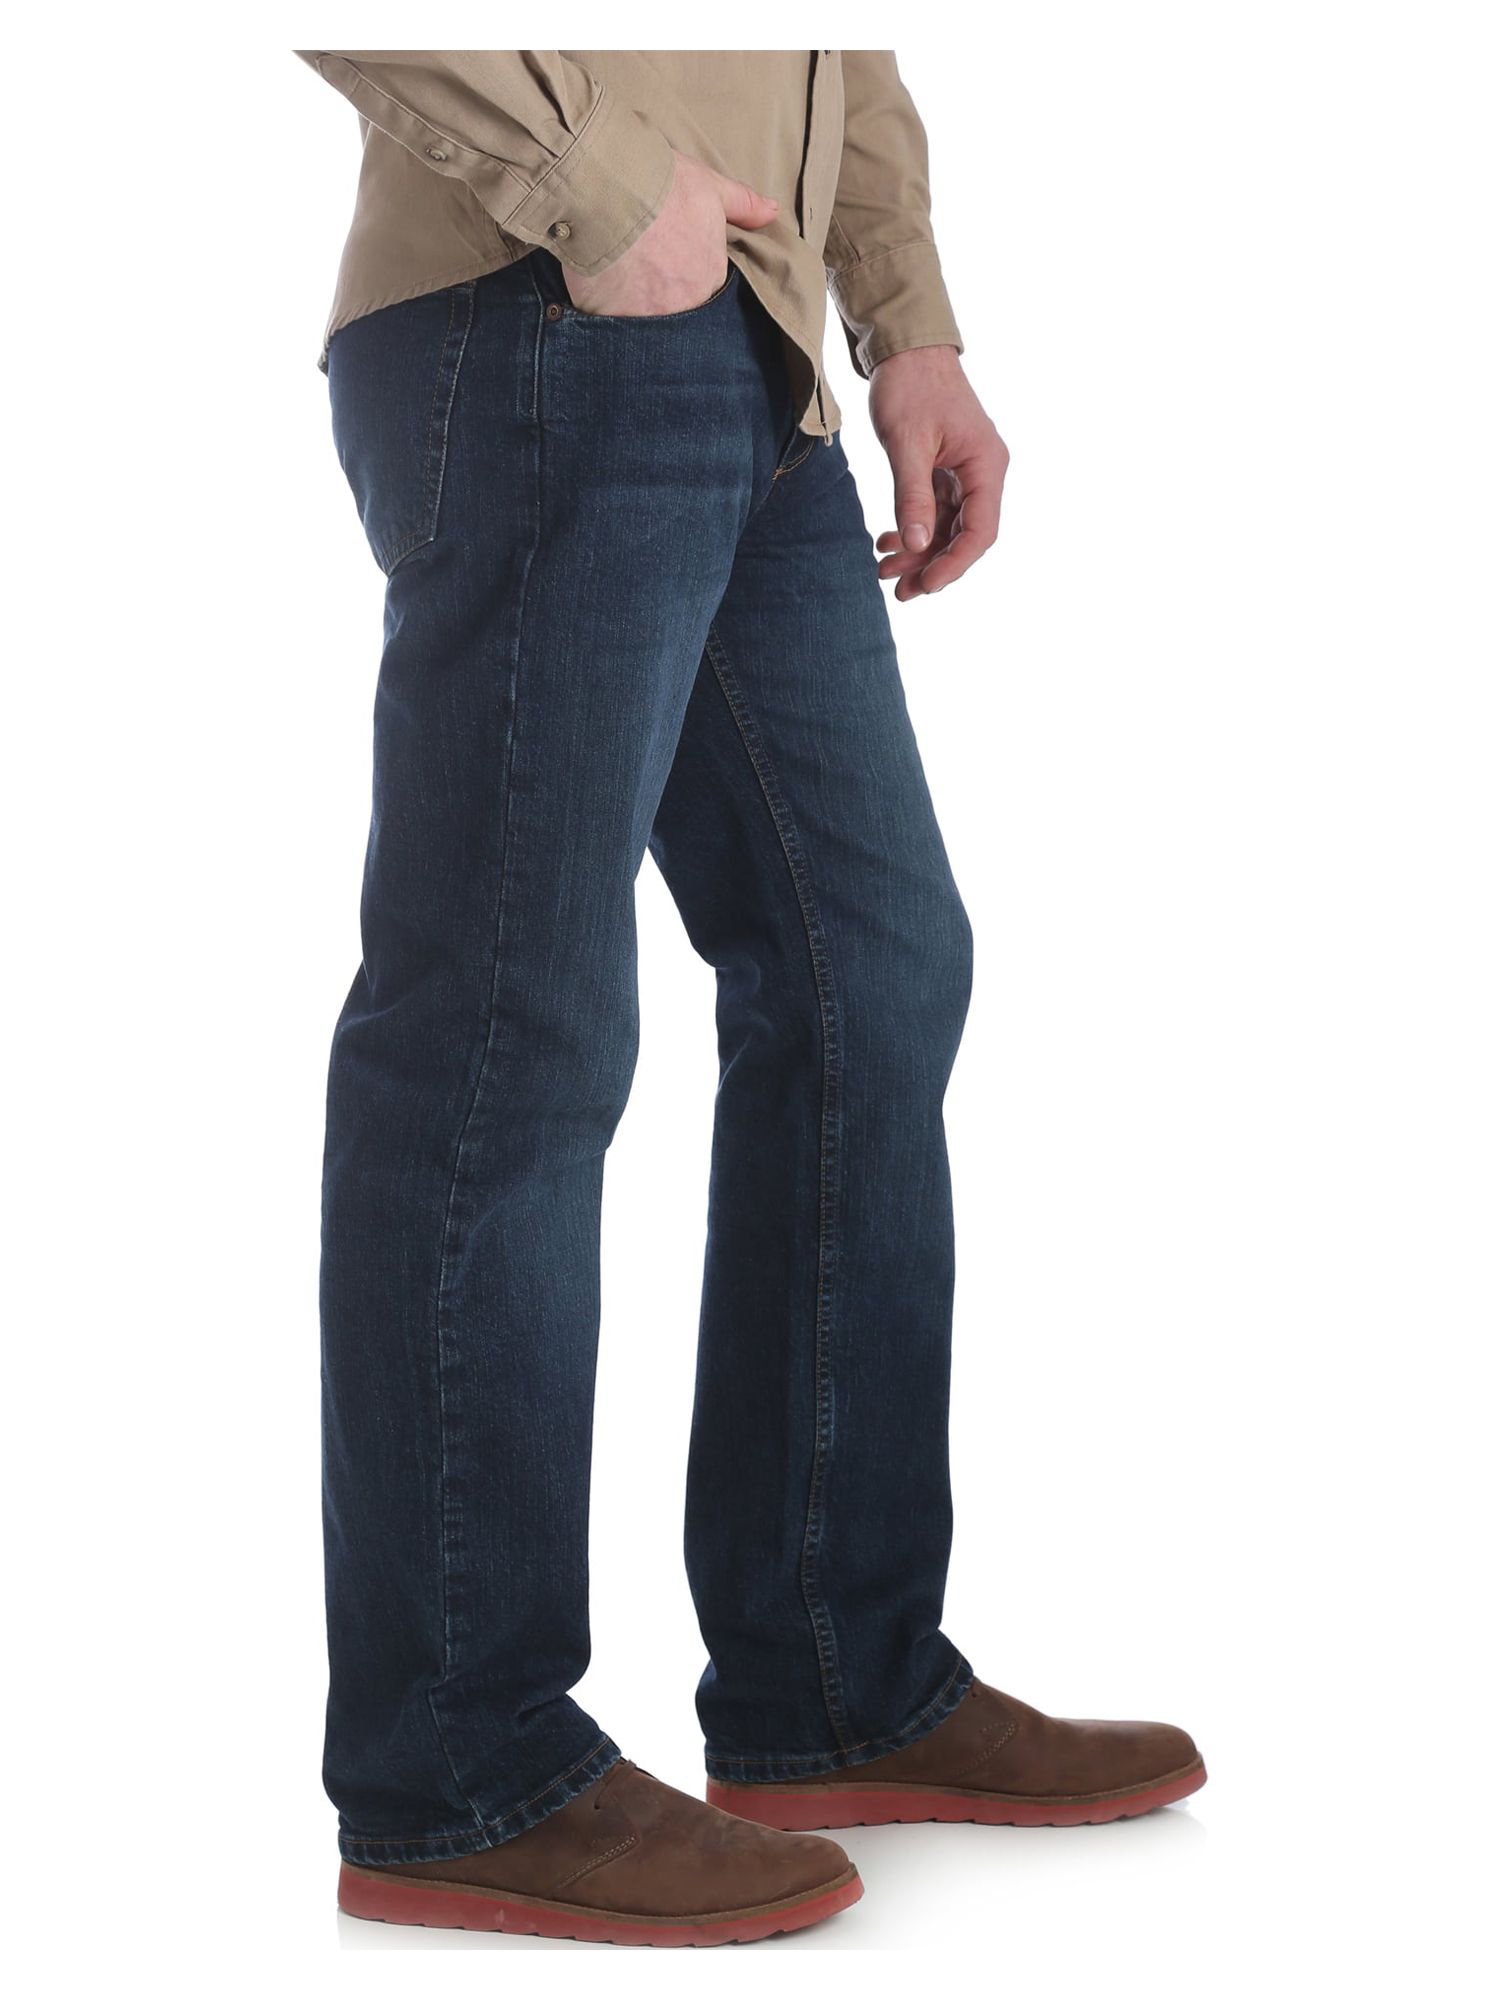 Wrangler Men's and Big Men's Straight Fit Jeans with Flex - image 4 of 7